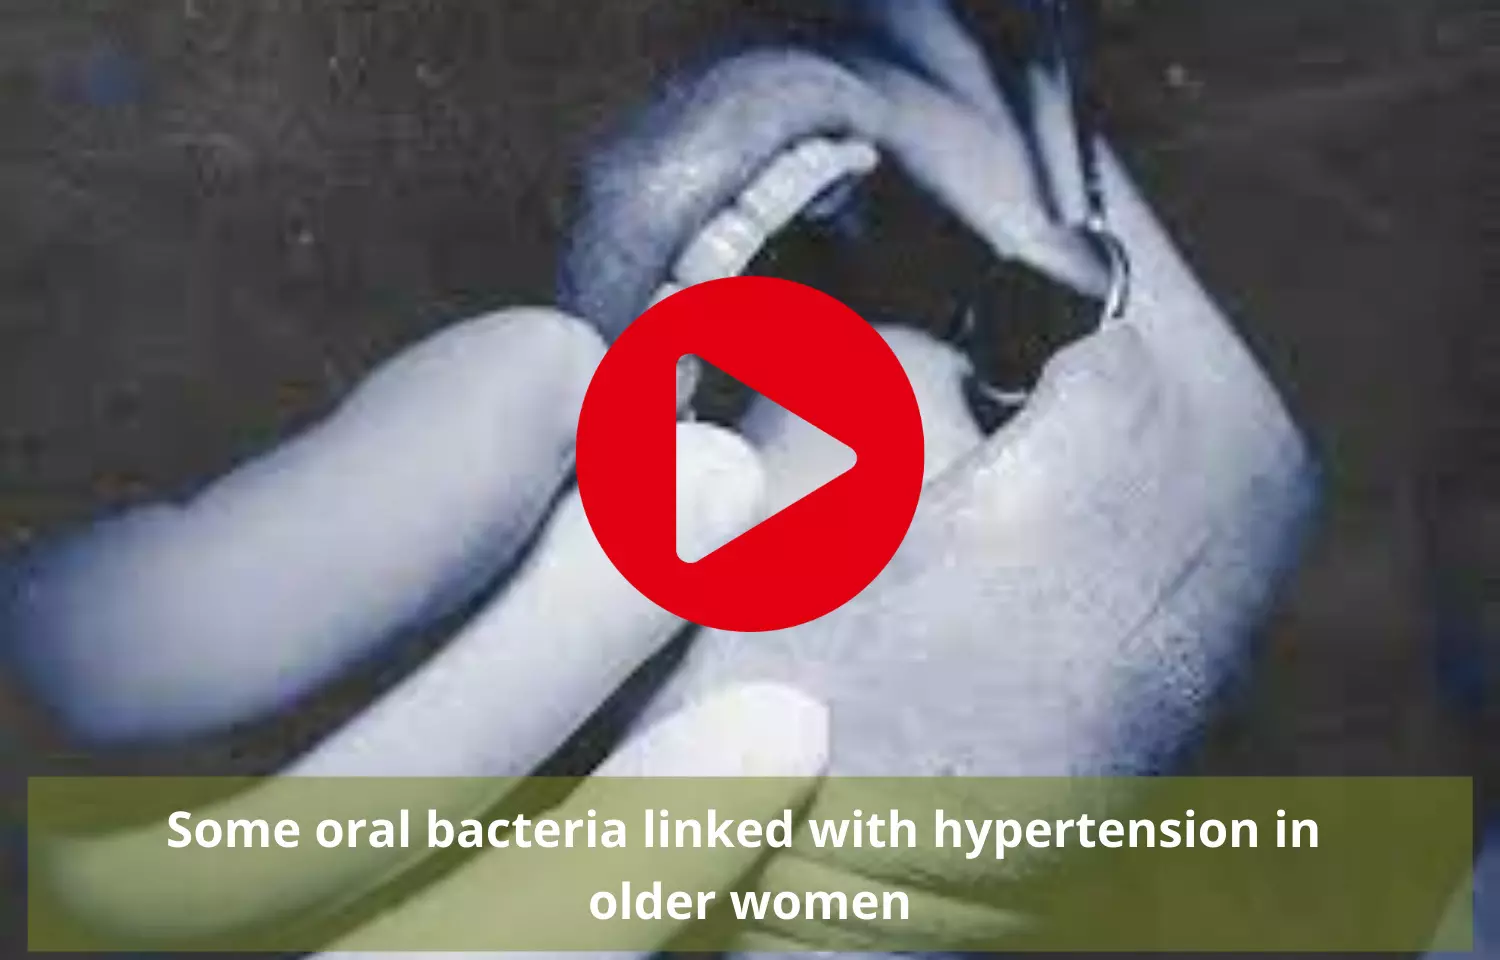 Few oral bacteria linked with hypertension in older women